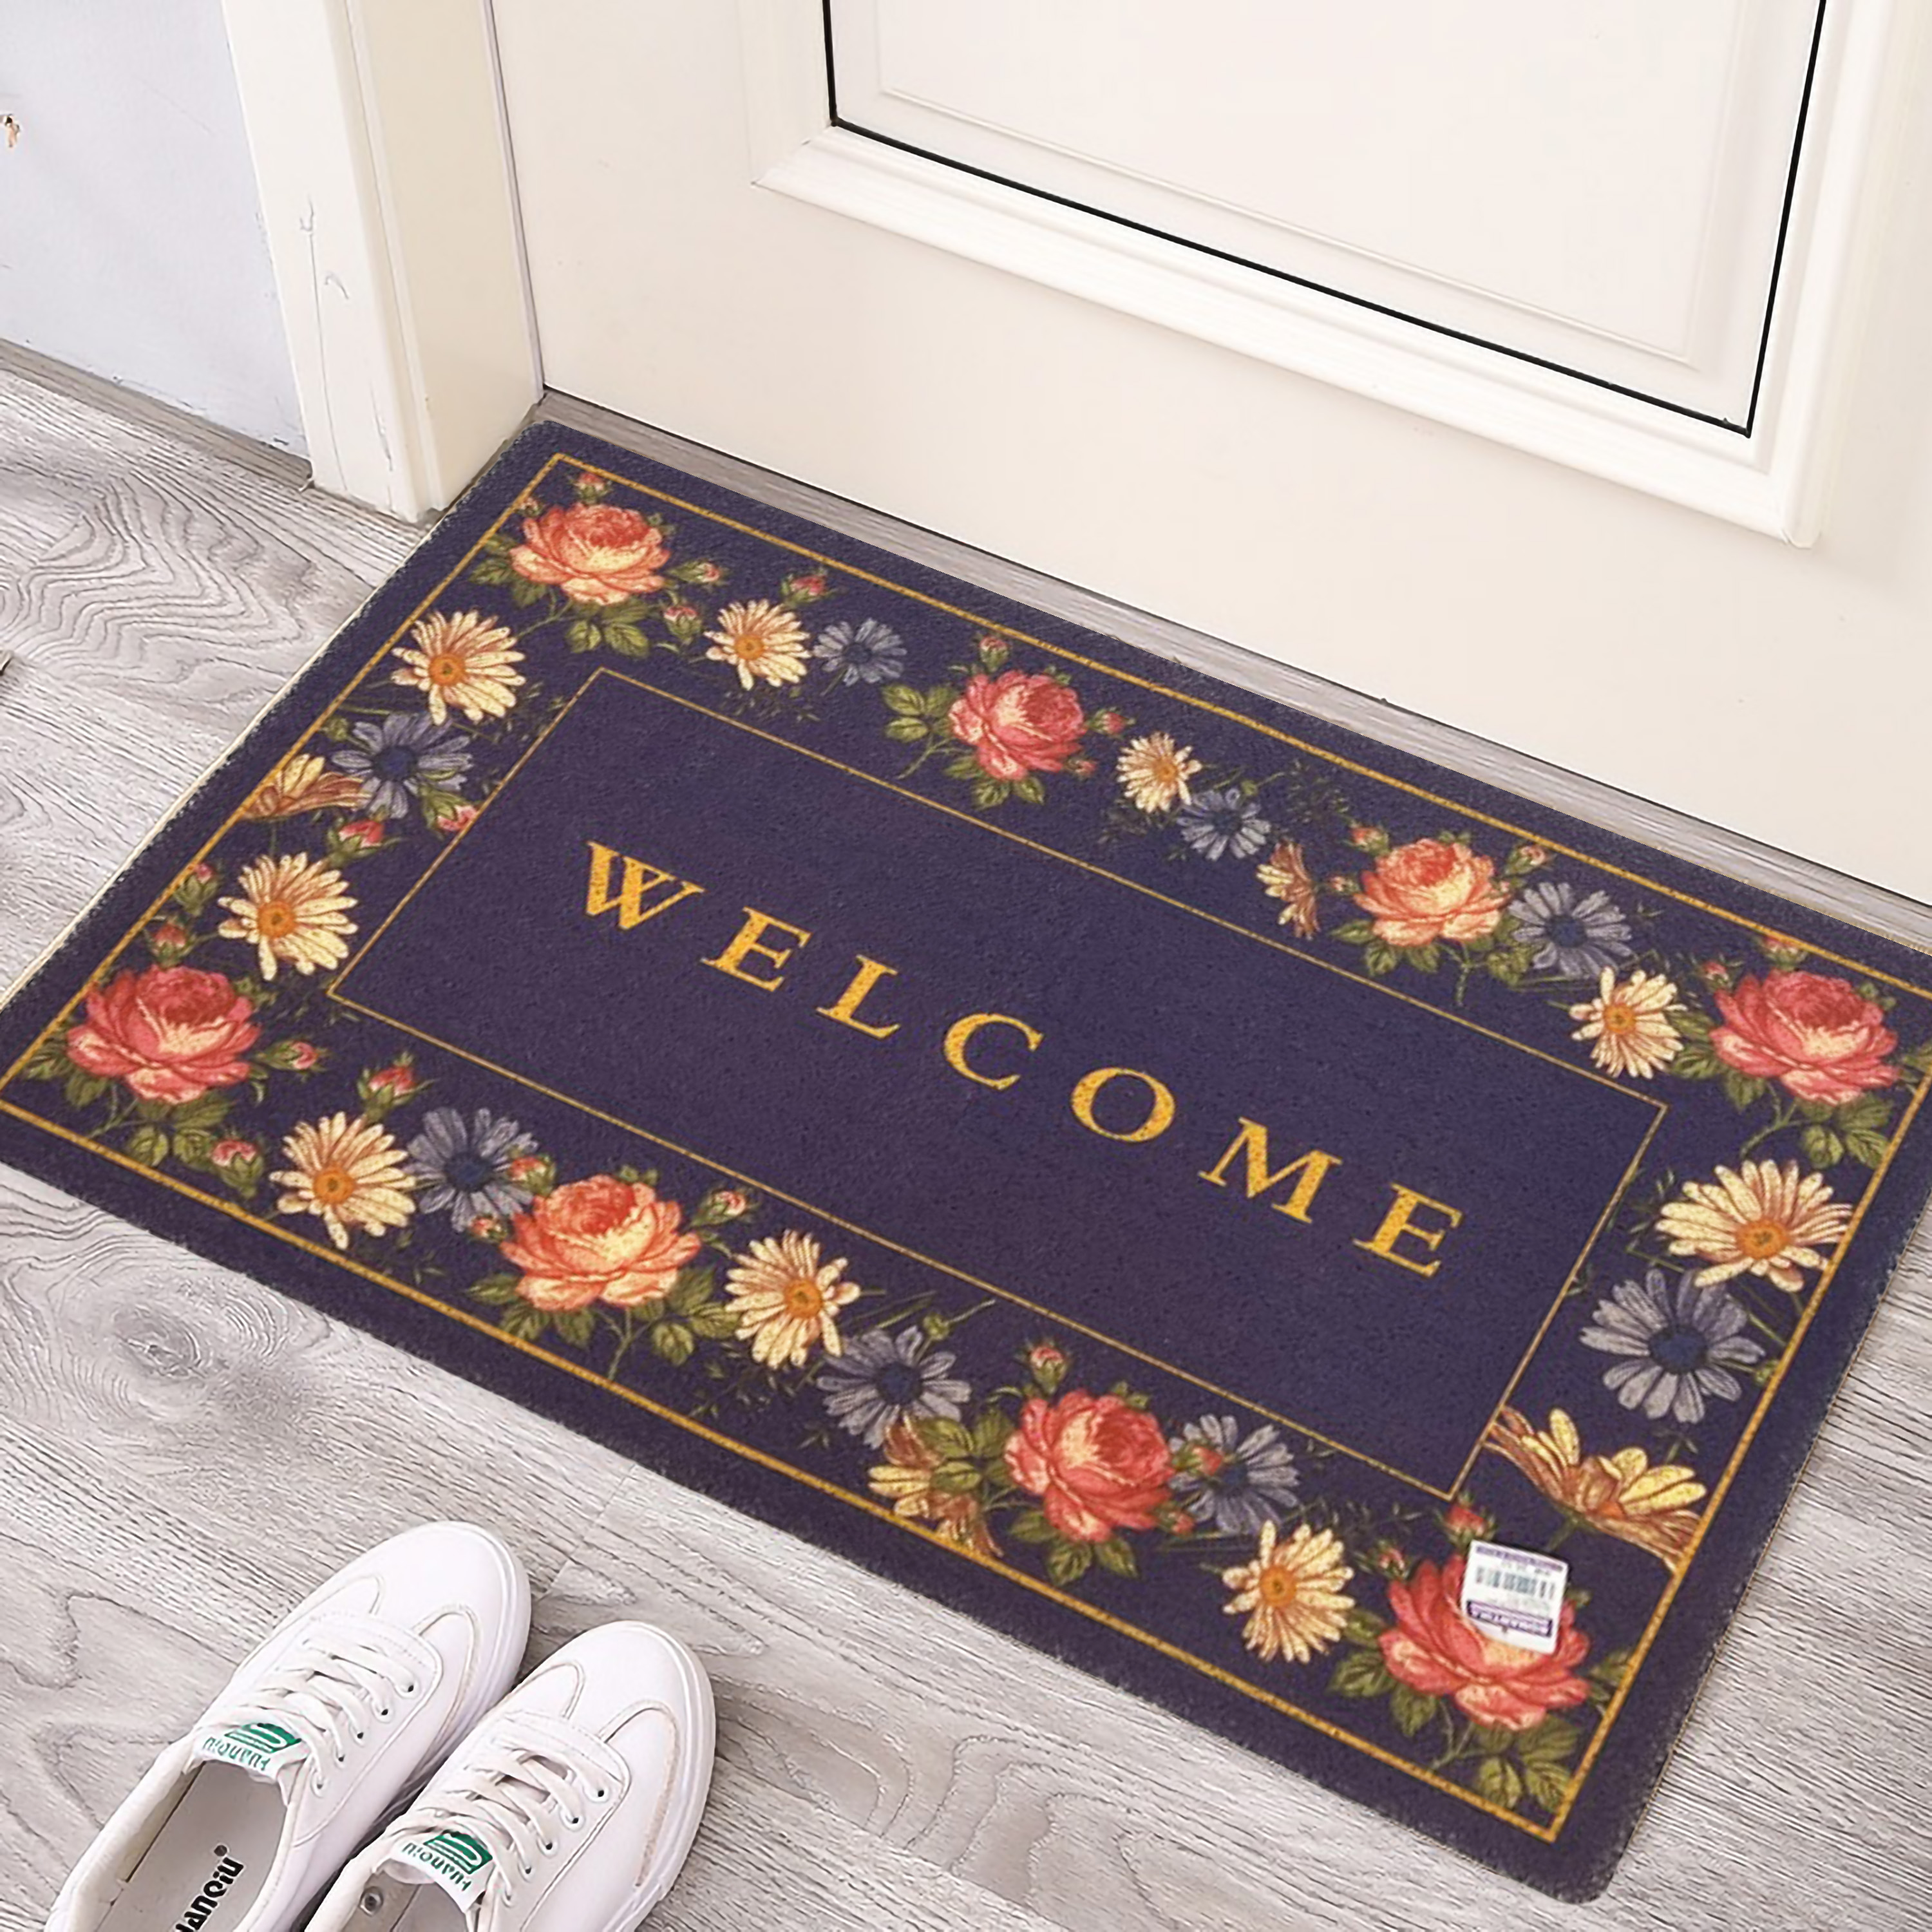 Highest Quality! PVC Welcome Door Mat with Anti-Slip Diamond Backing -  China Nti-Slip PVC Welcome Entrance and Entrance Mat price